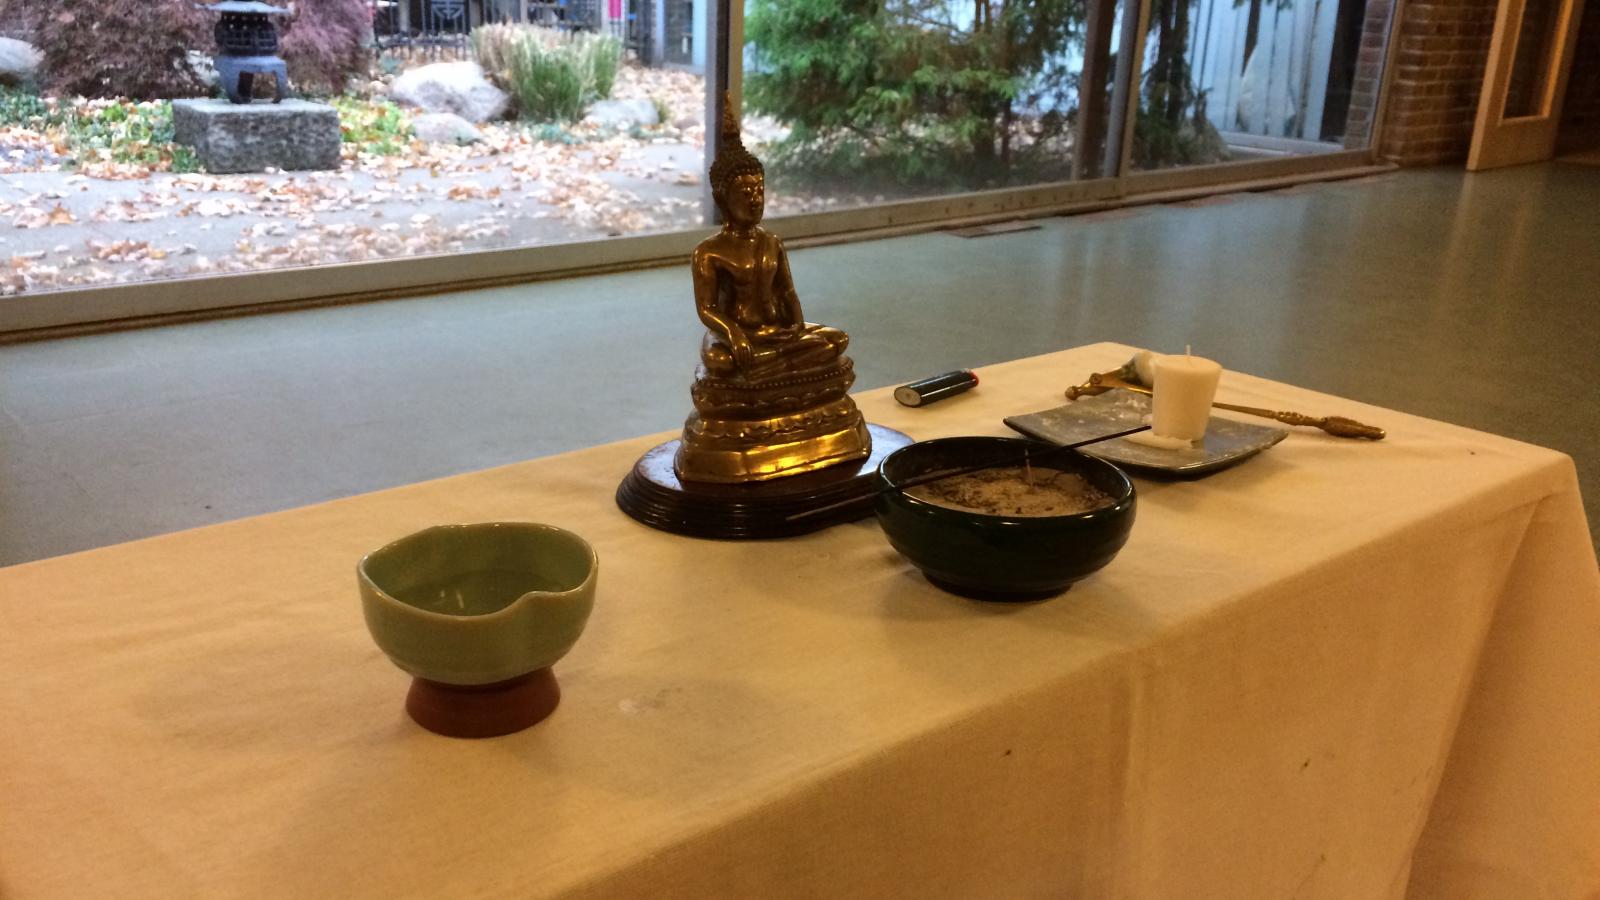 The Buddha altar with a statue of Buddha, incense, a candle and water